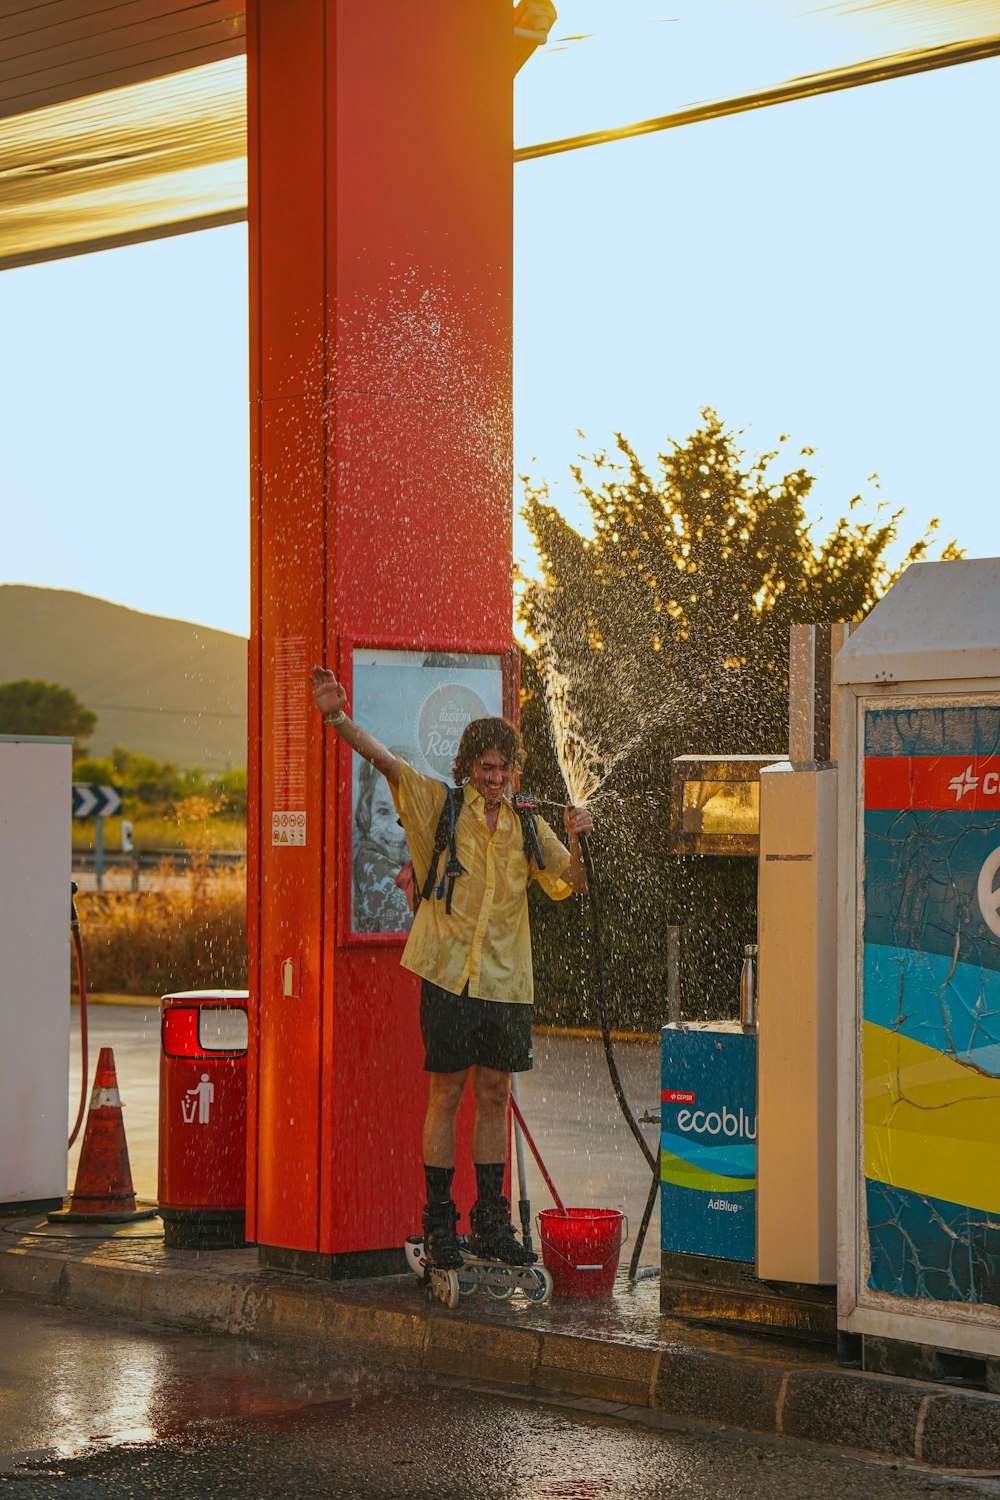 a man is washing his hands at a gas station